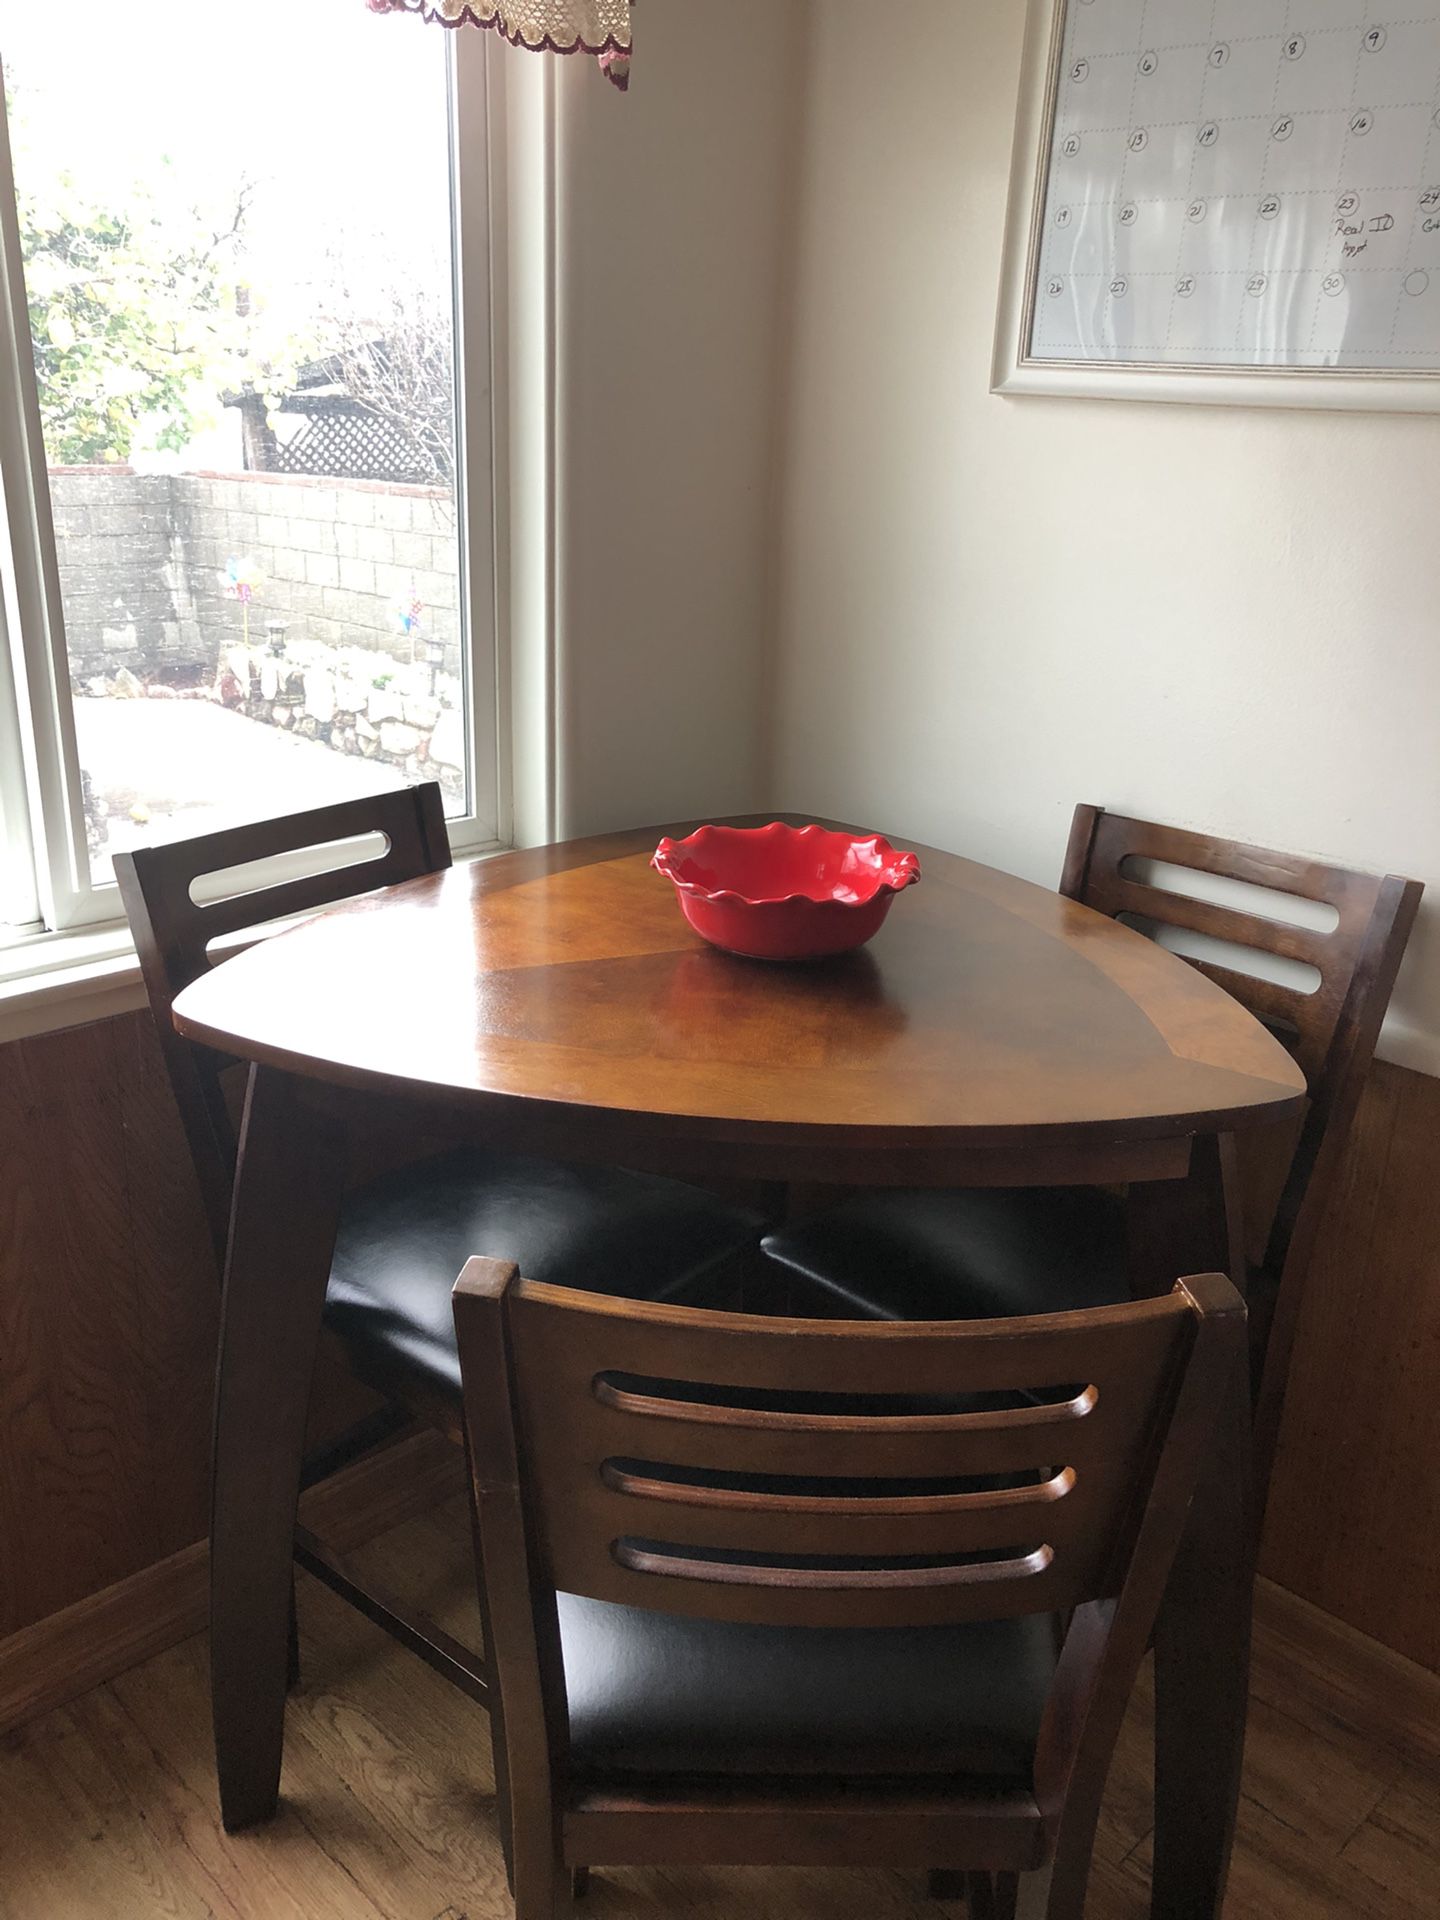 Kitchen table small